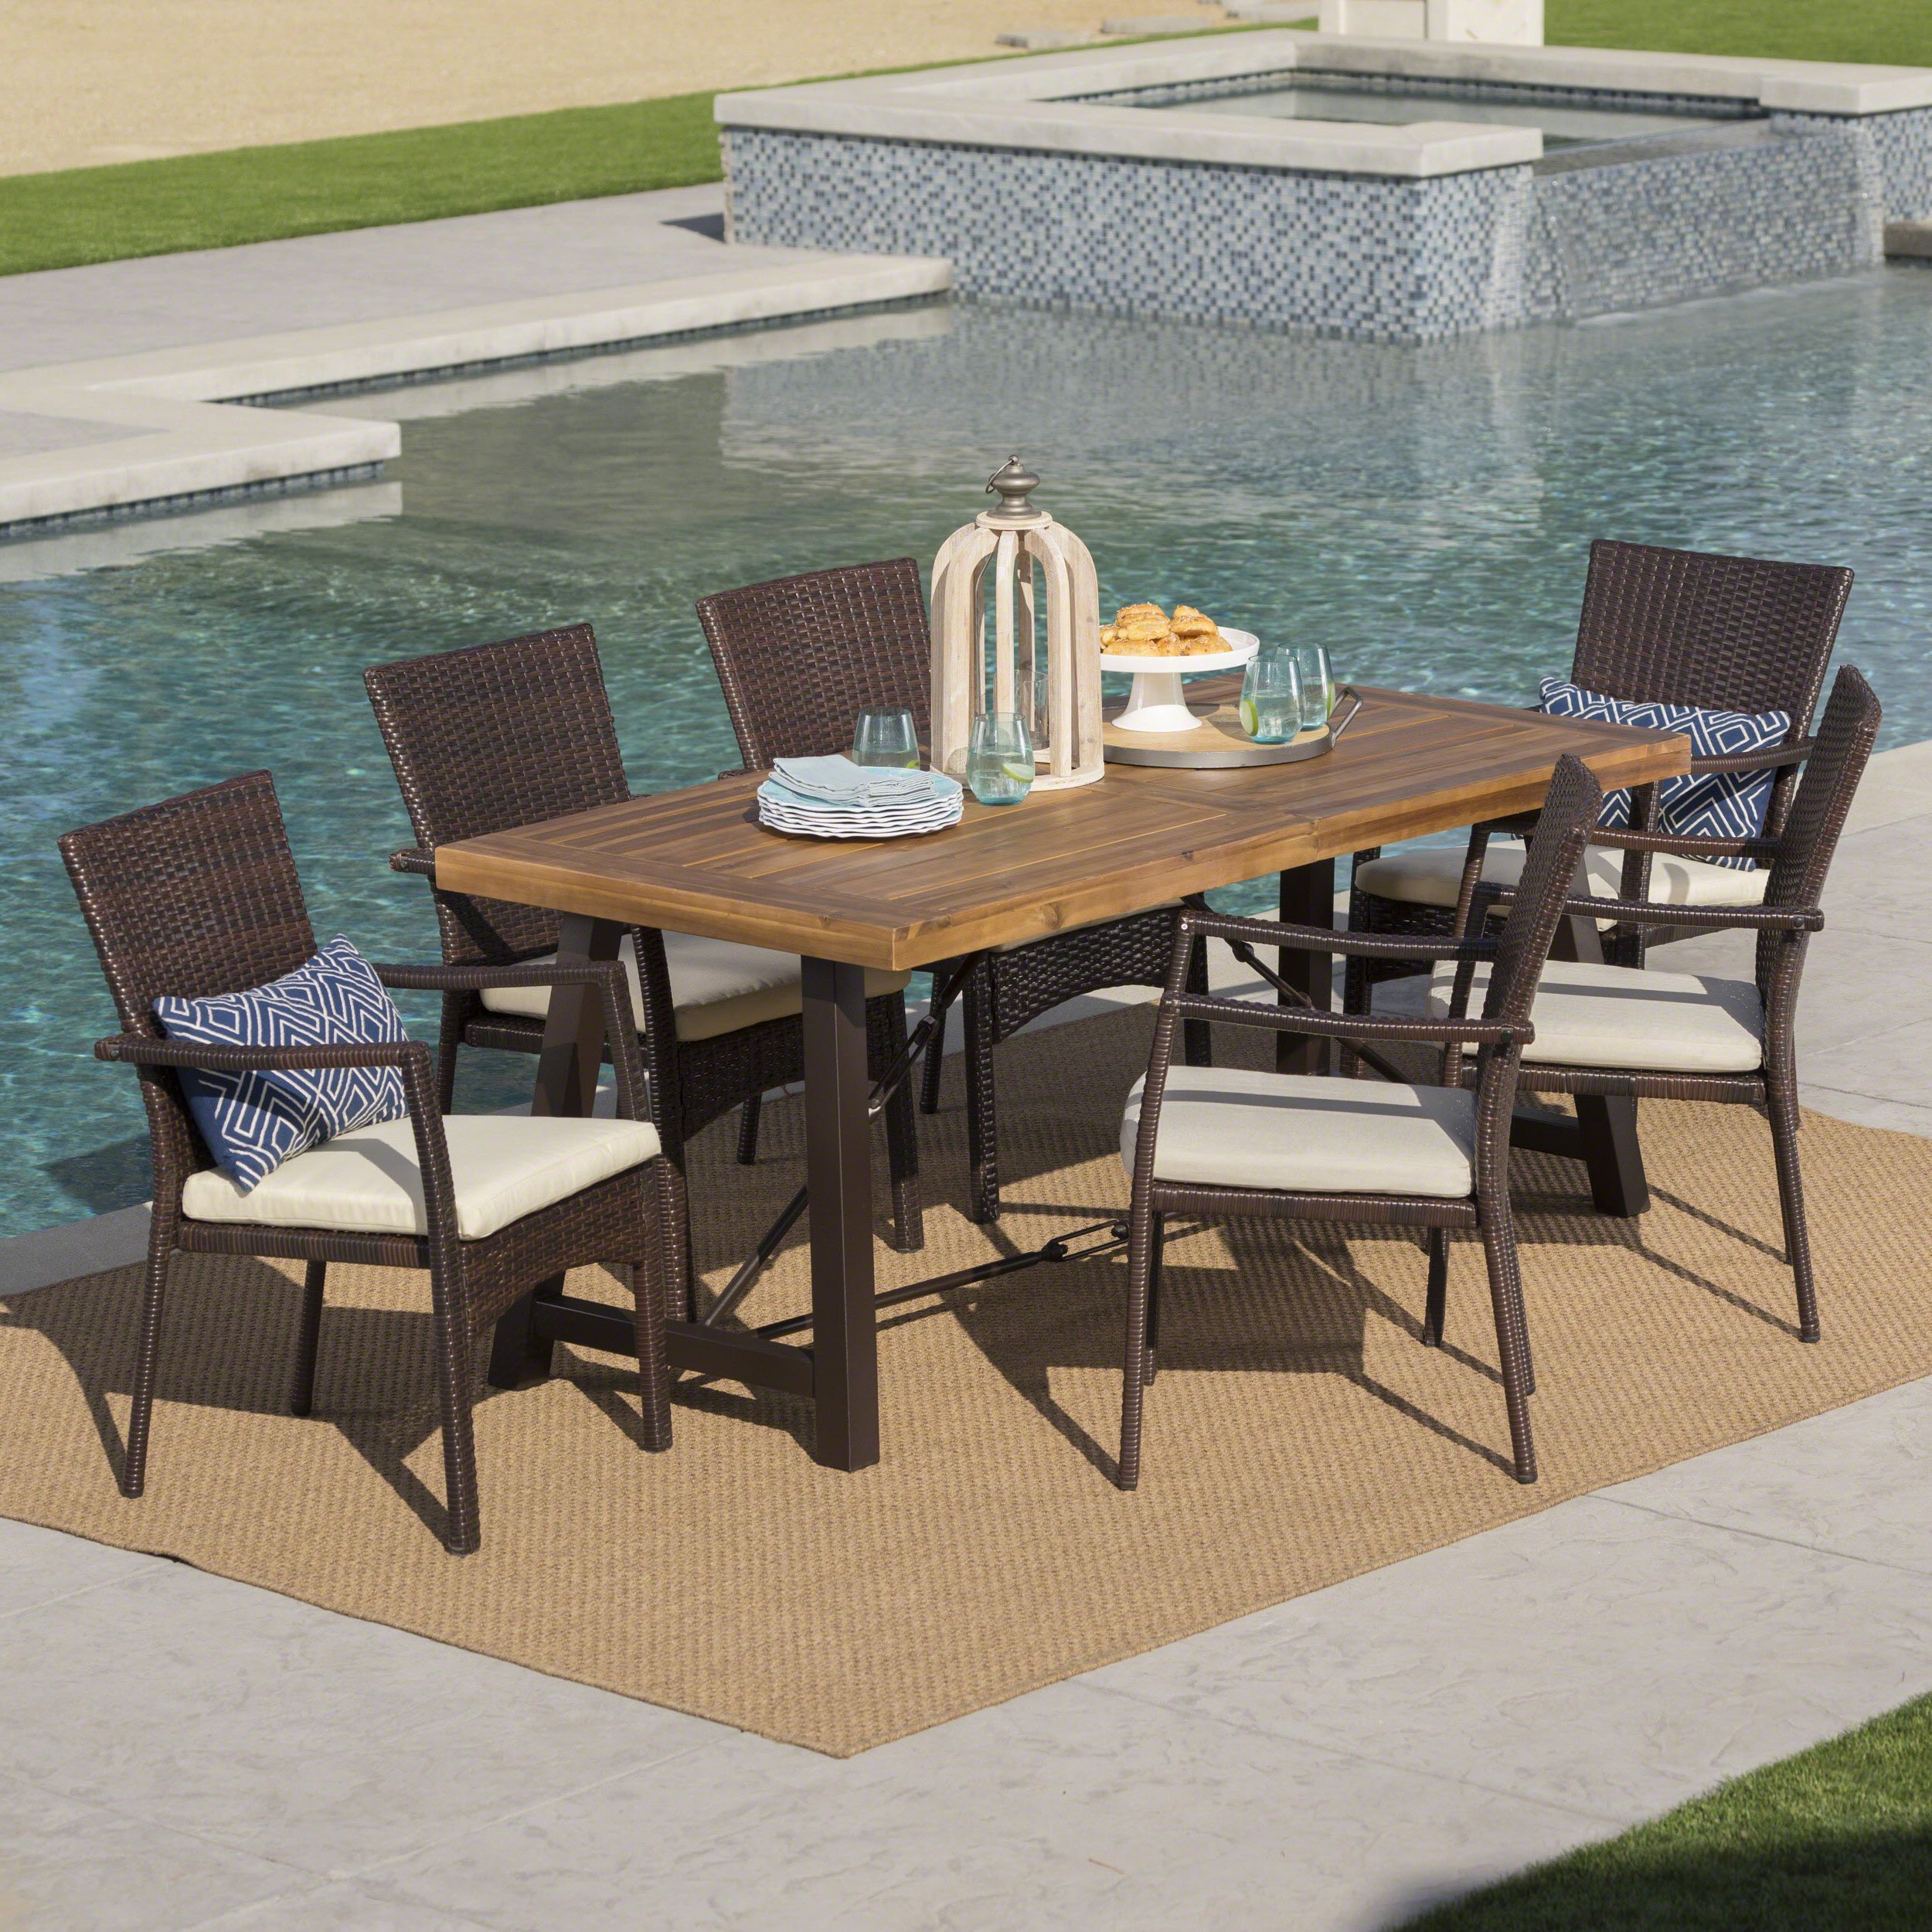 Preferred Teak Wood Outdoor Table And Chairs Sets With Landon Outdoor 7 Piece Dining Set With Teak Finished Wood Table And (View 5 of 15)